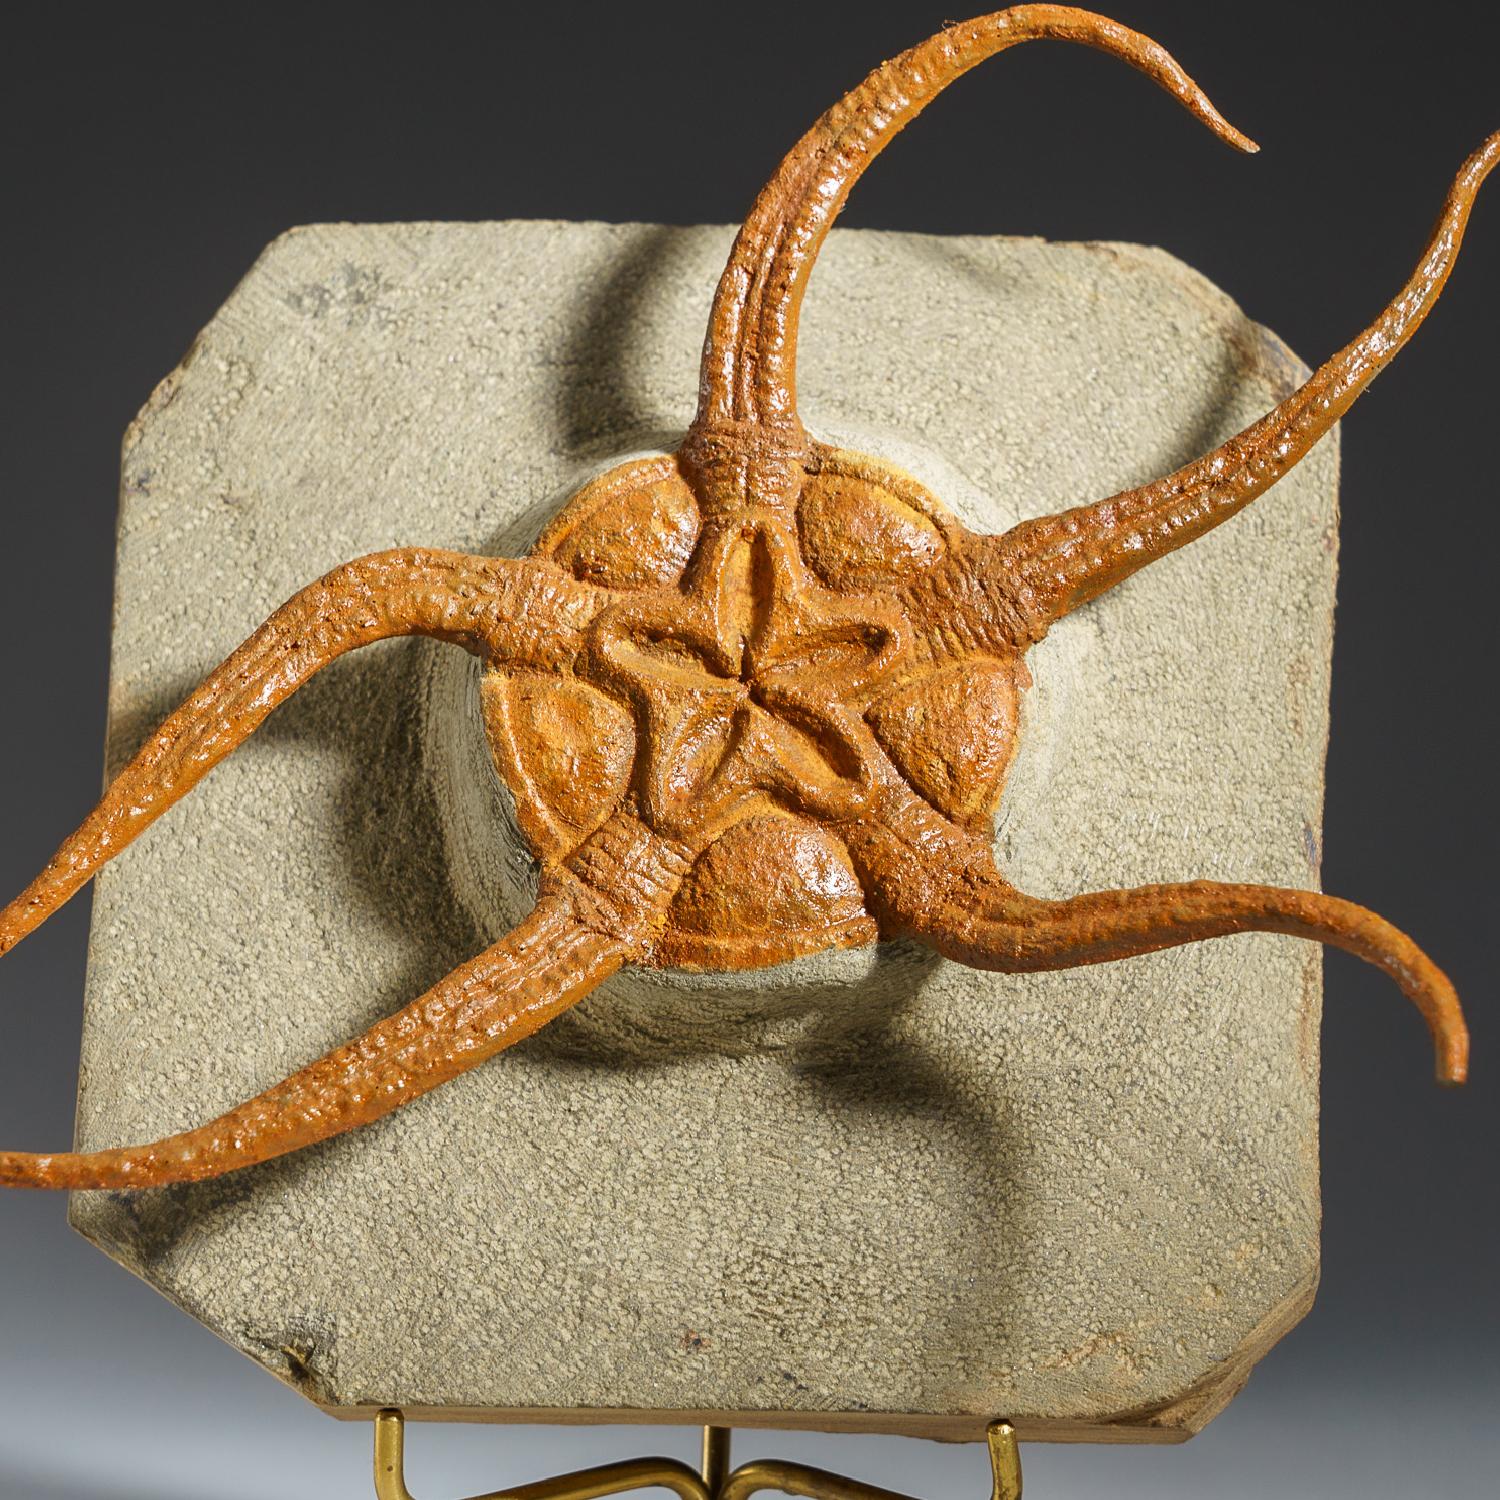 Genuine Ophiuroidea Brittle Star Fossil with Customized Display Stand (1.8 lbs) In Excellent Condition For Sale In New York, NY